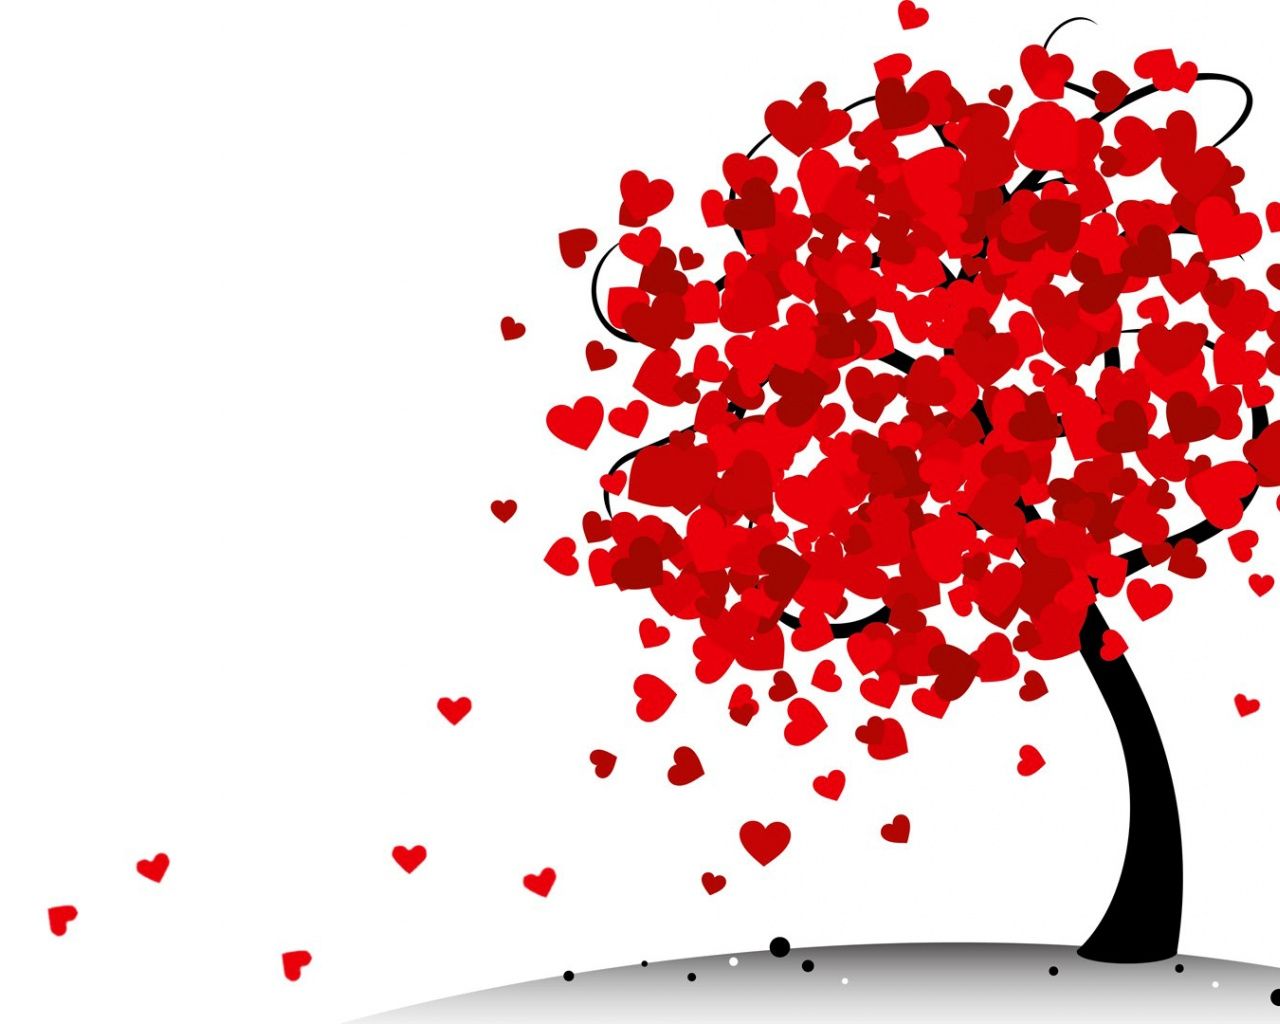 Red Heart Tree Wallpapers